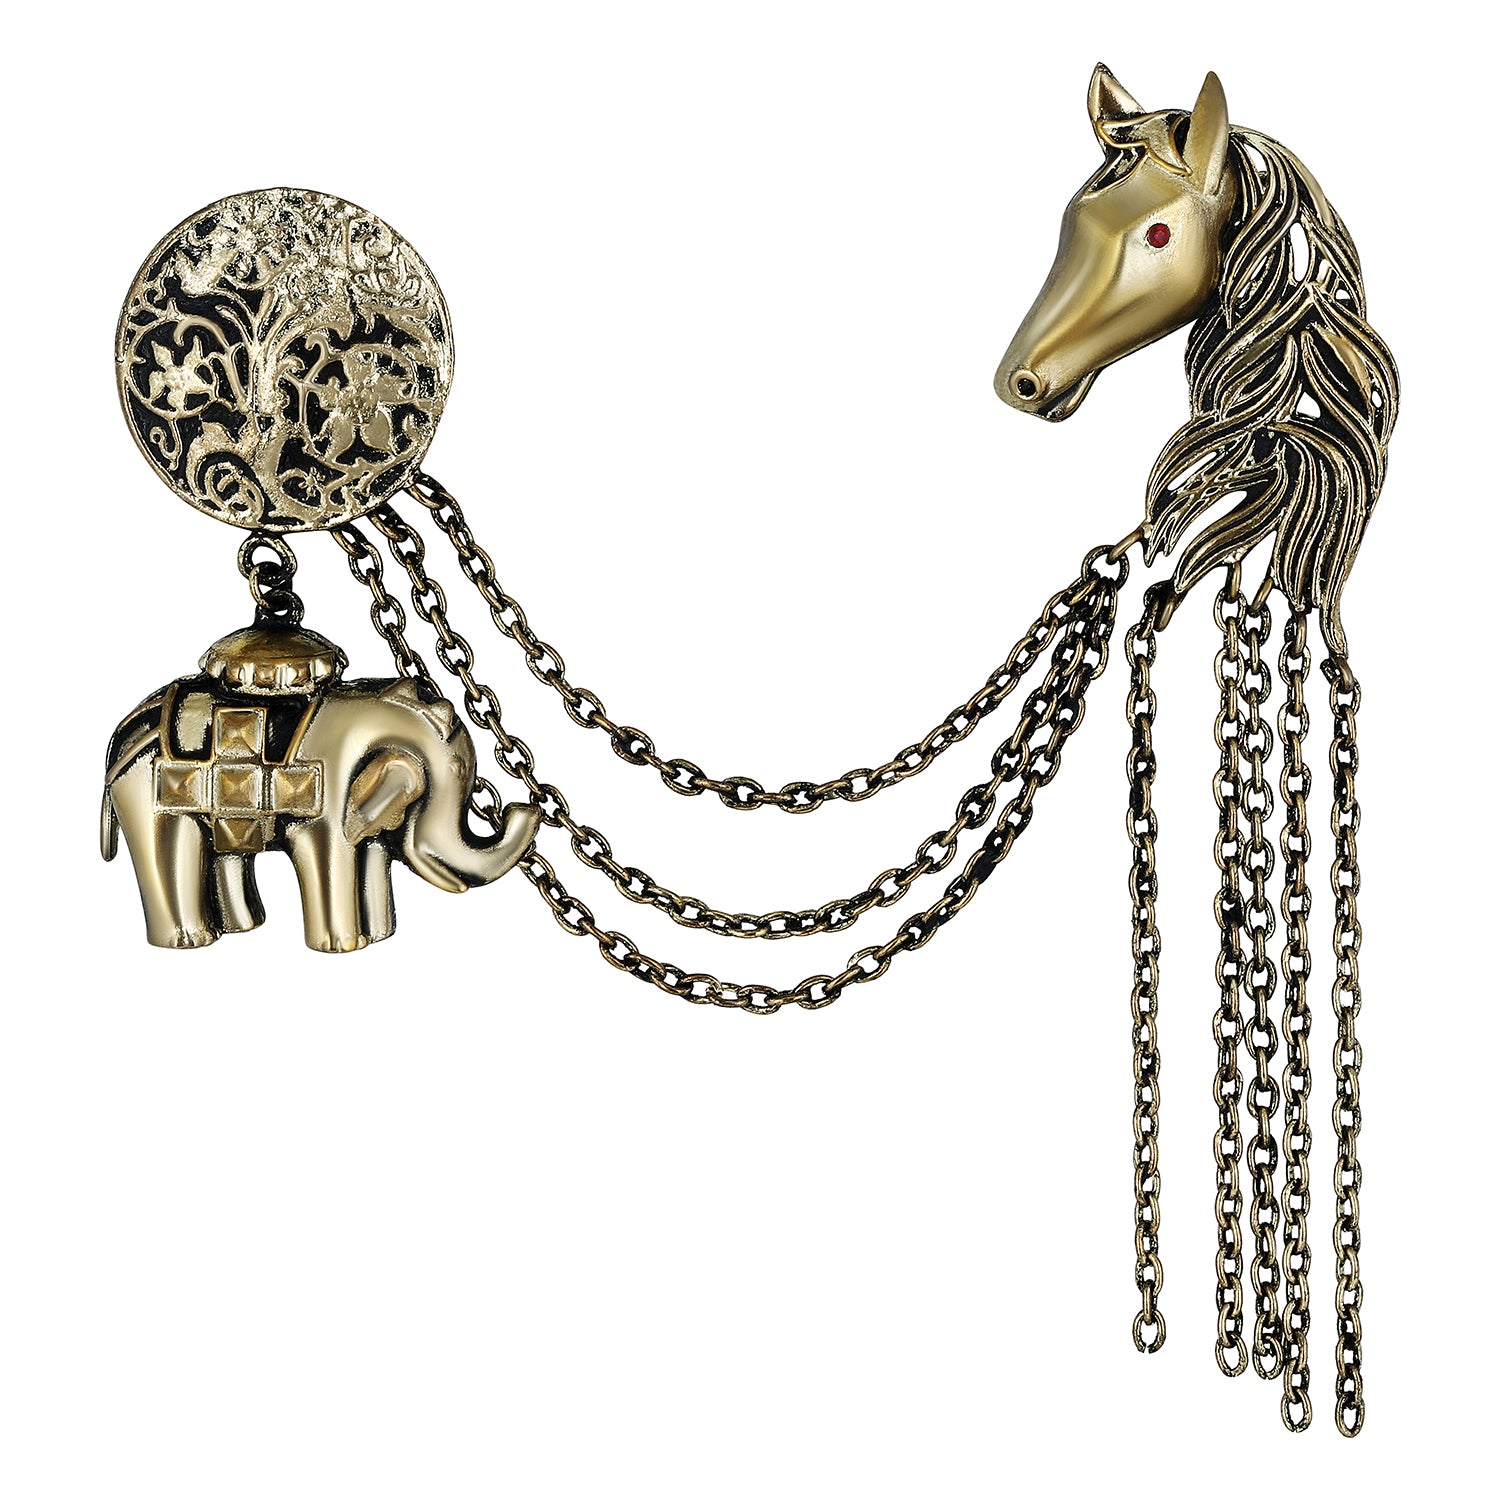 Baby Elaphant and Horse Face Shaped Floral Brooch Pin with Chain